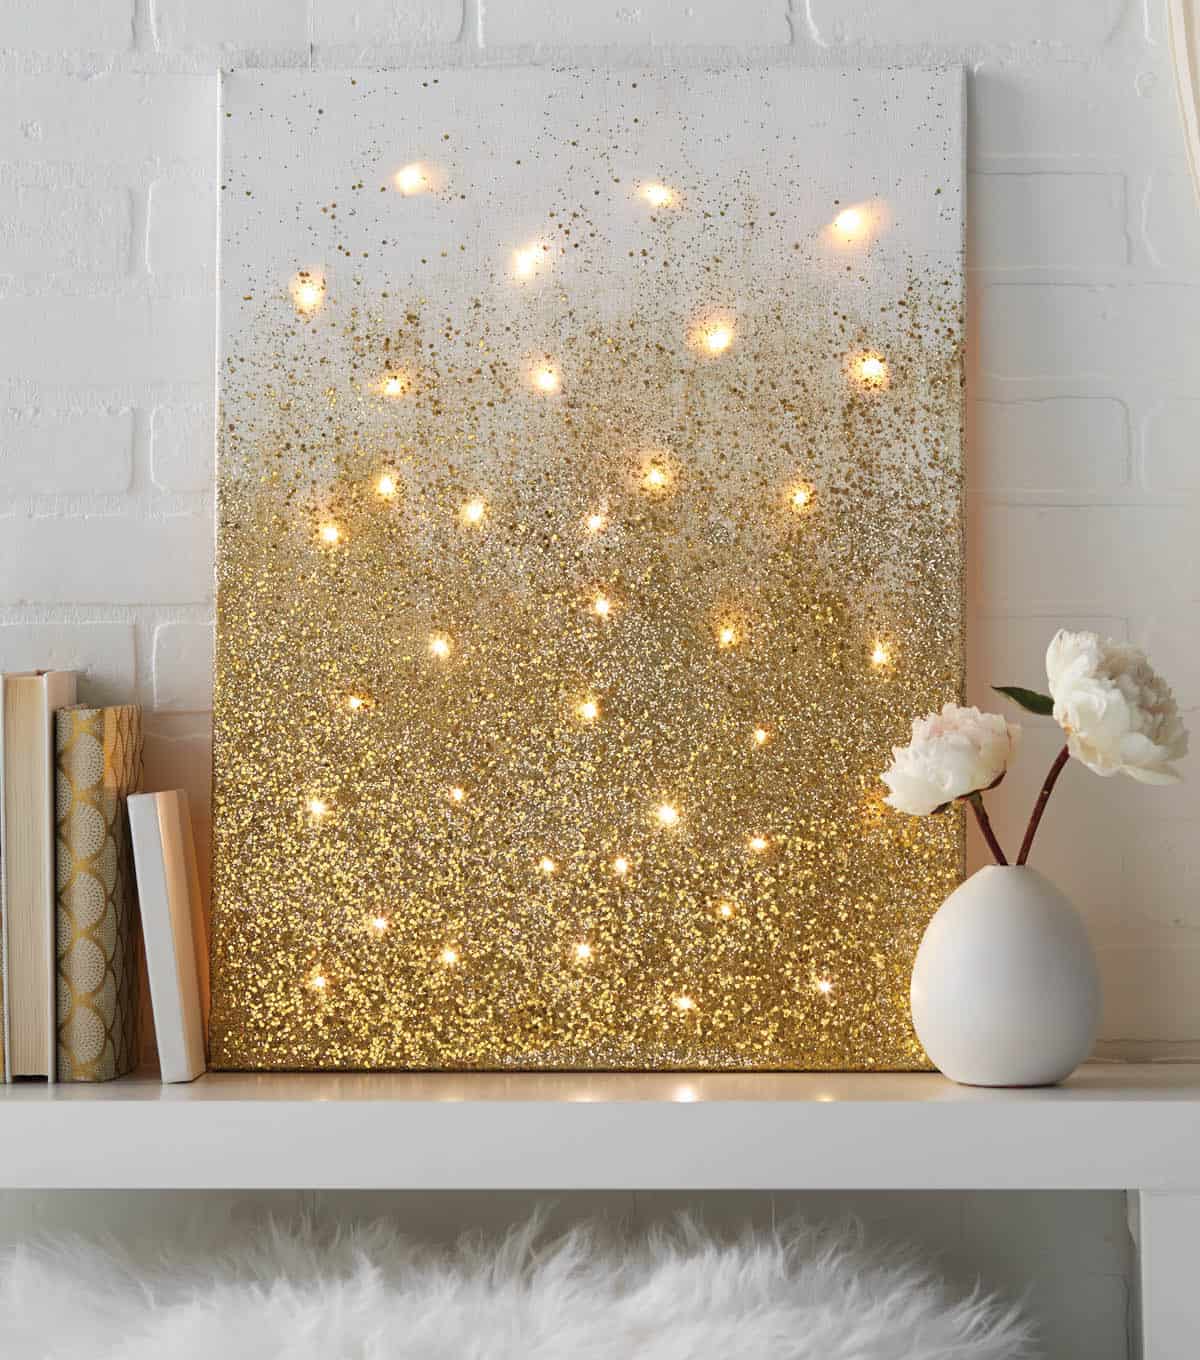 24. TAKE THINGS A LITTLE BIT FURTHER AND TRANSFORM YOUR WORK OF ART INTO A LIGHT DESIGN PIECE